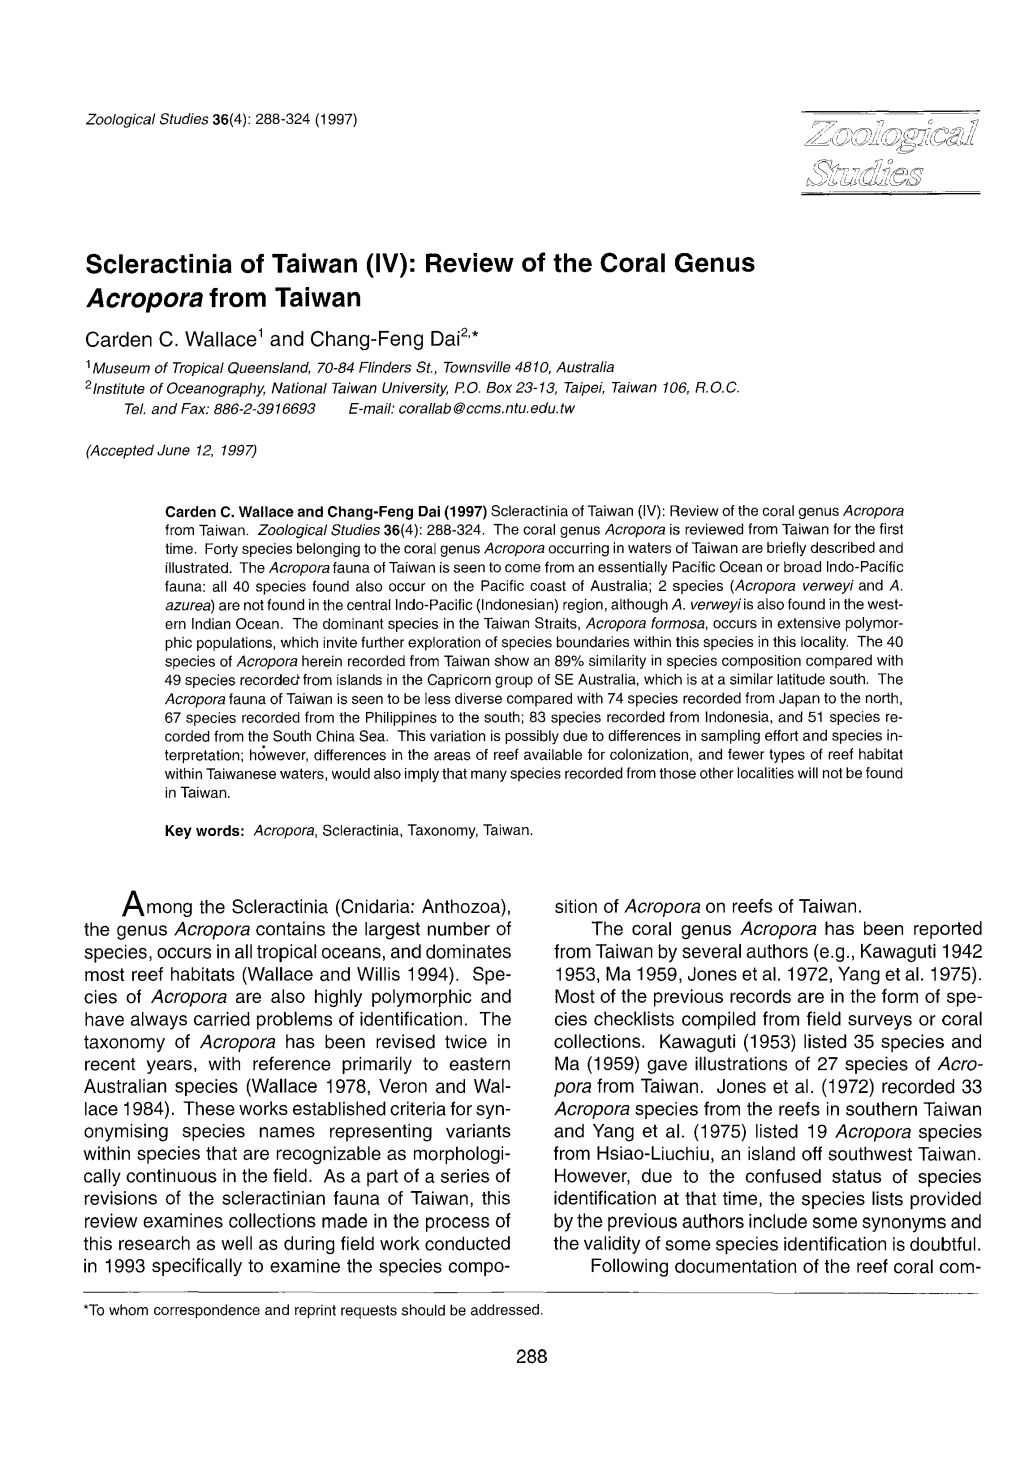 Scleractinia of Taiwan (IV): Review of the Coral Genus Acropora from Taiwan